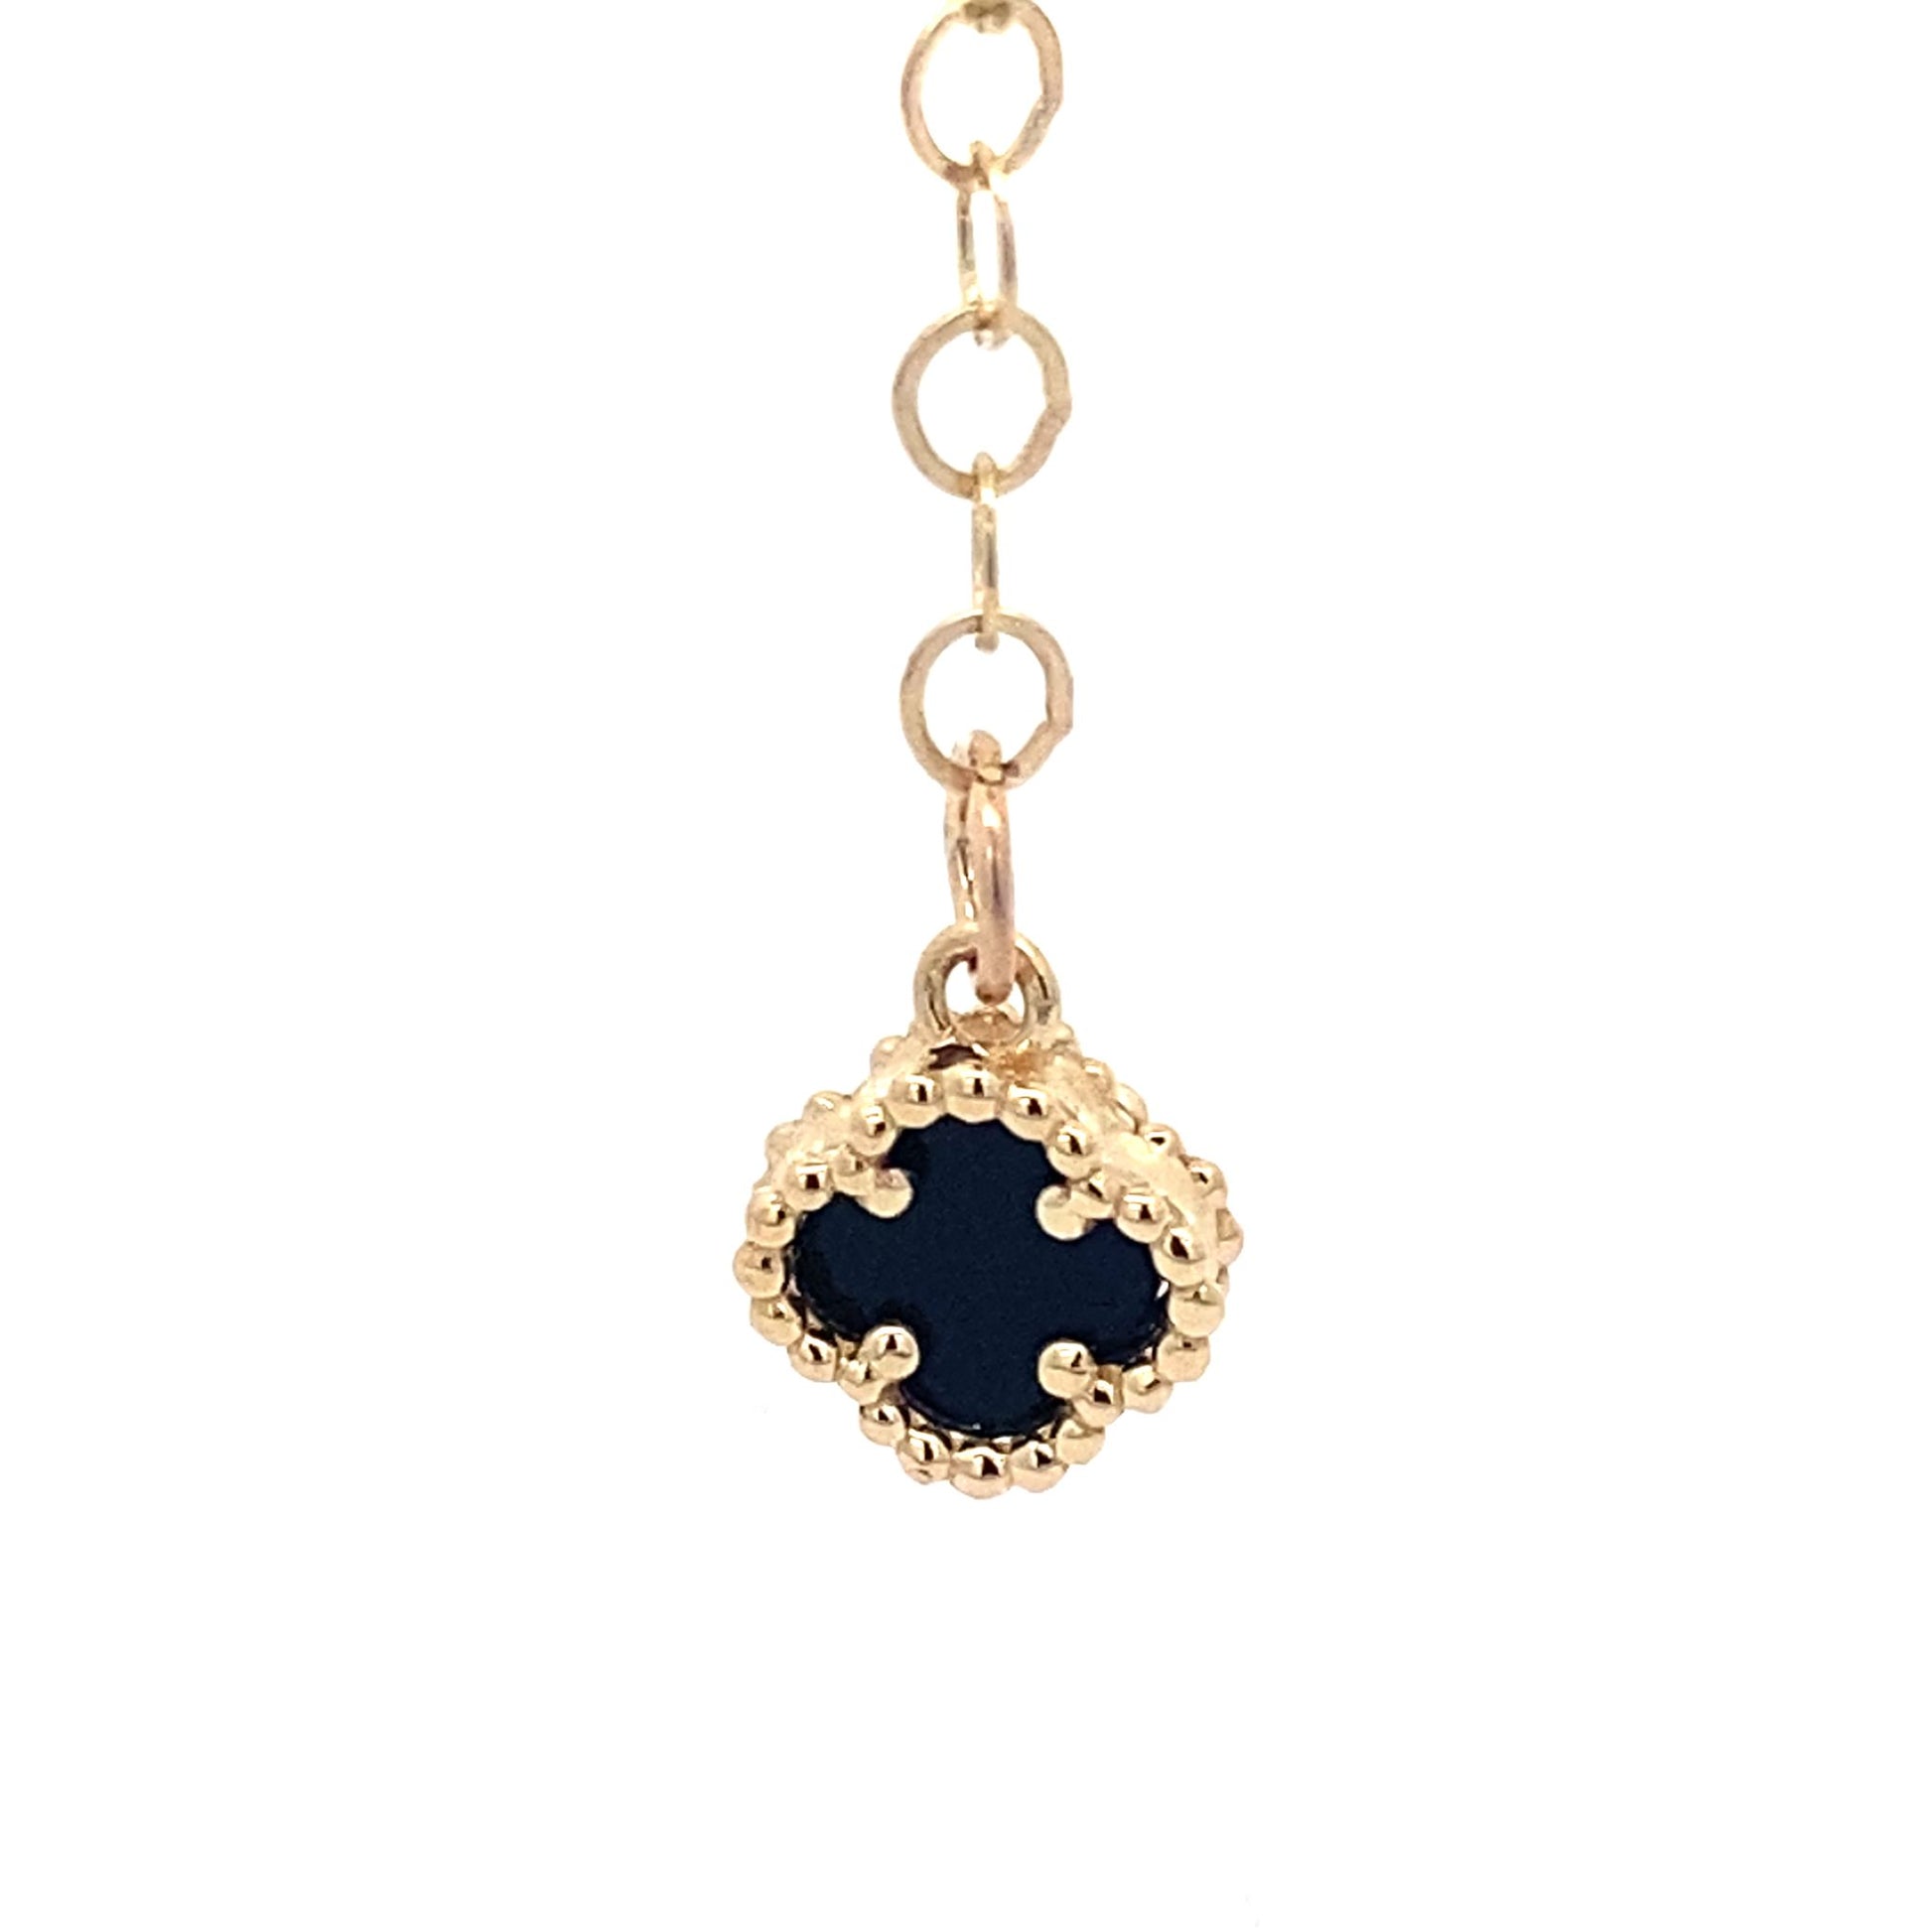 14K Yellow Gold Onyx Flower Necklace 19In